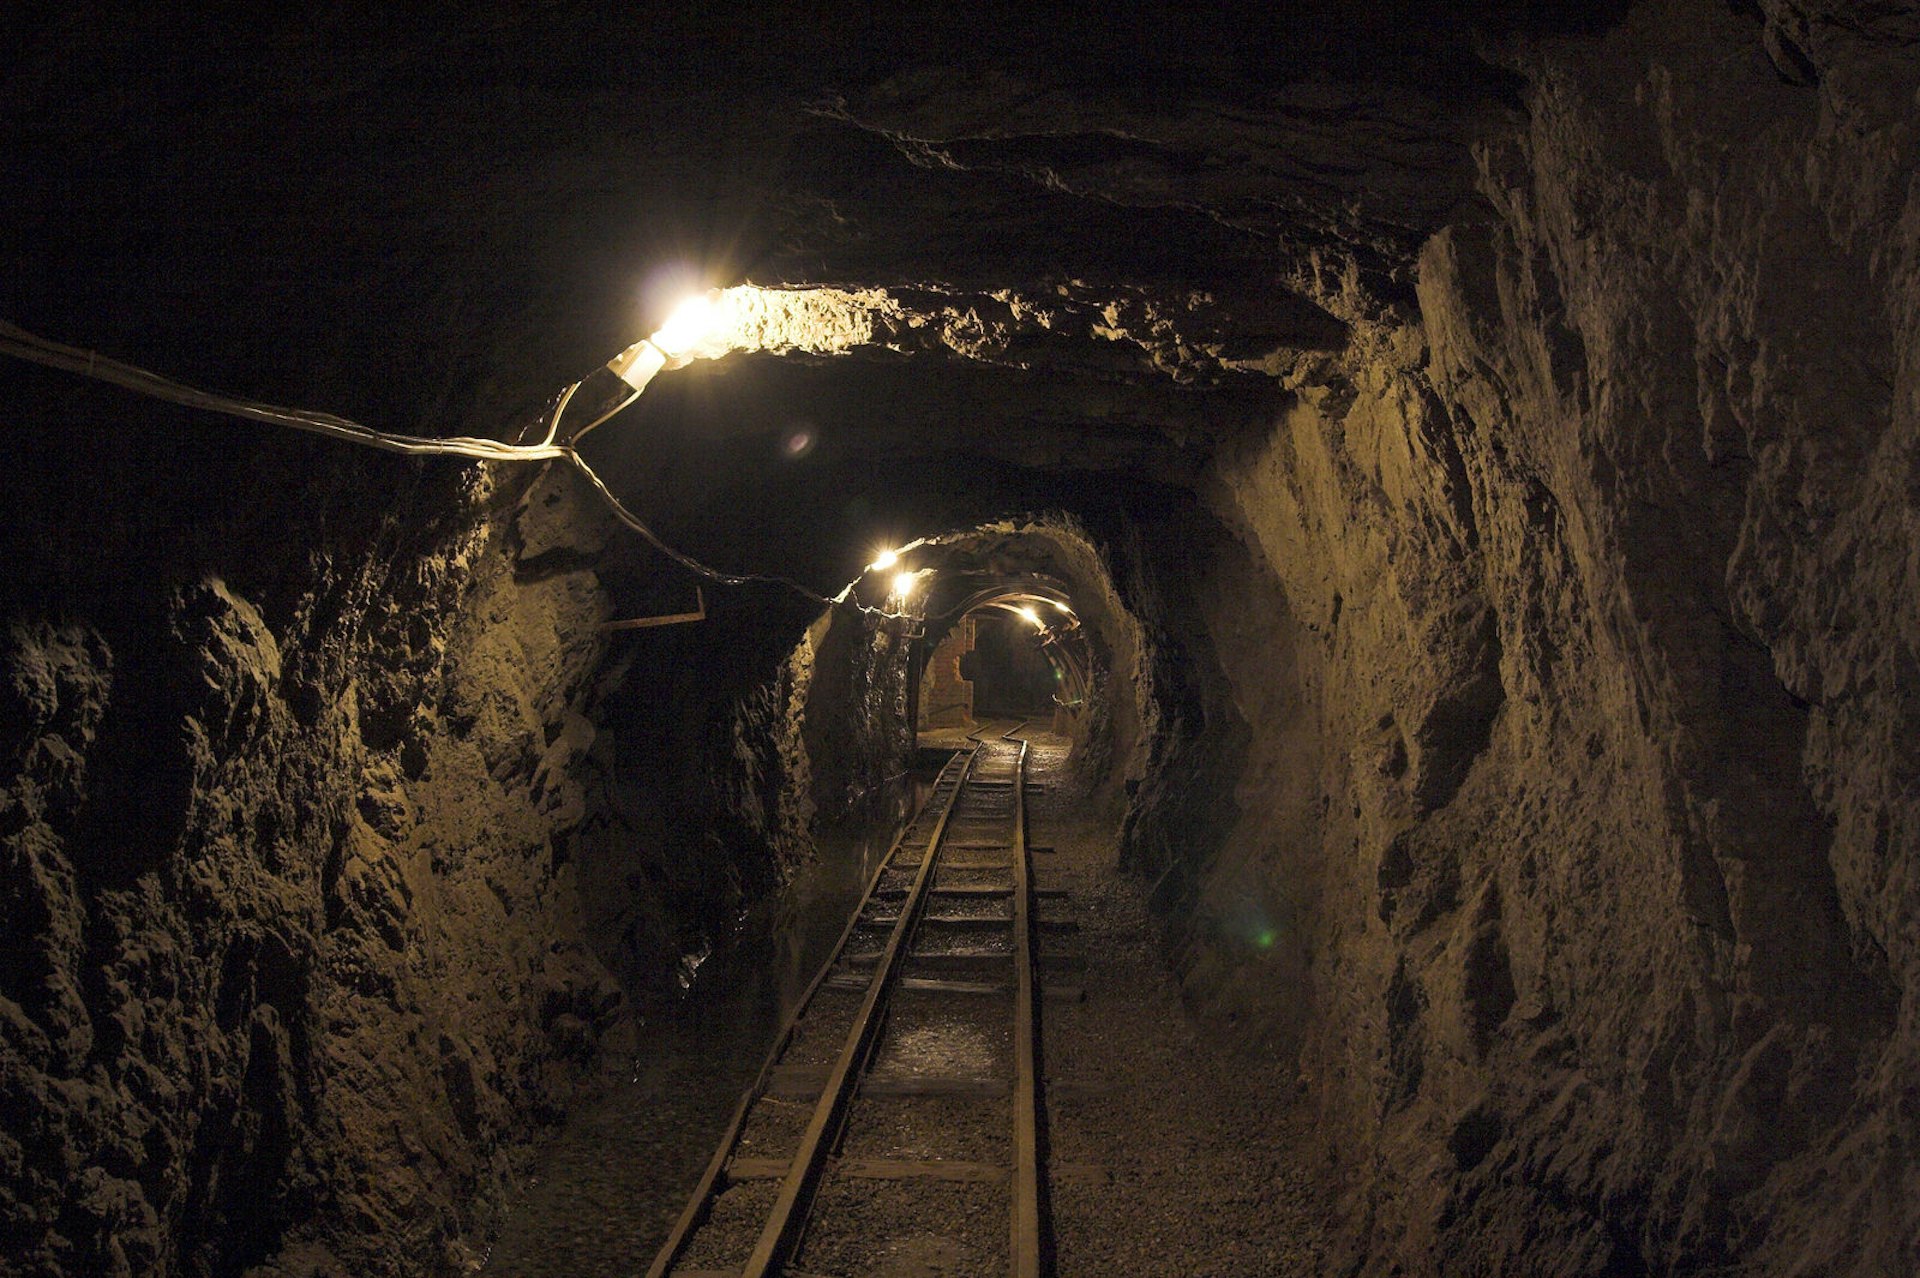 An internal view of a dark mine tunnel in Poland with train tracks running off into the distance